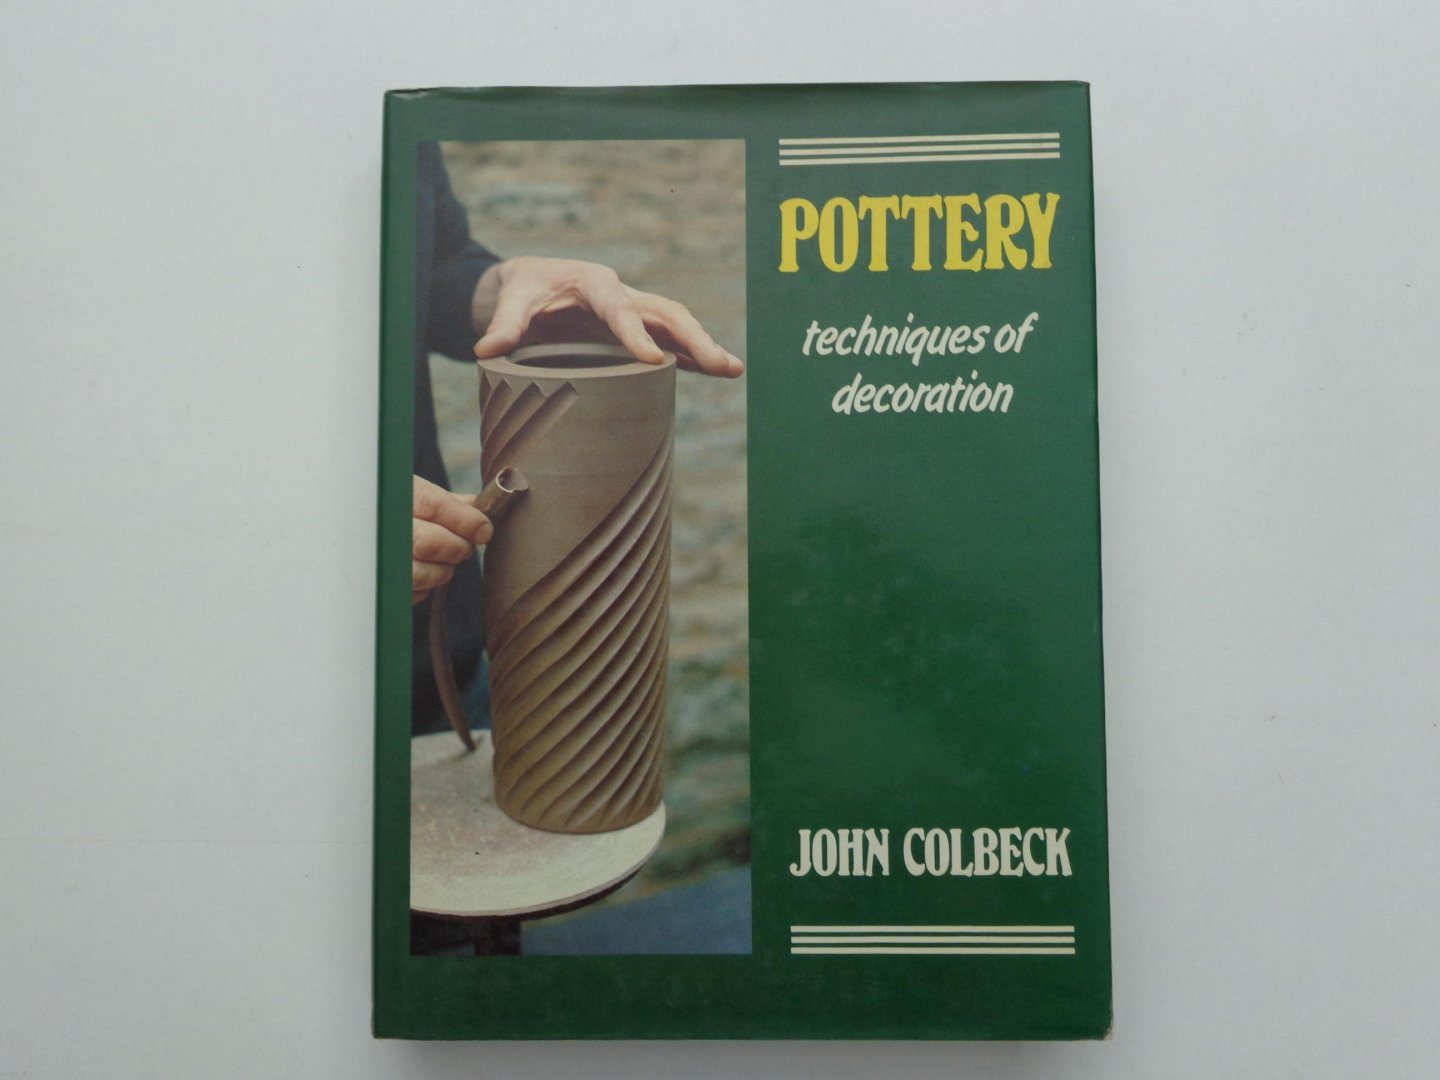 Colbeck, John - Pottery, techniques of decoration